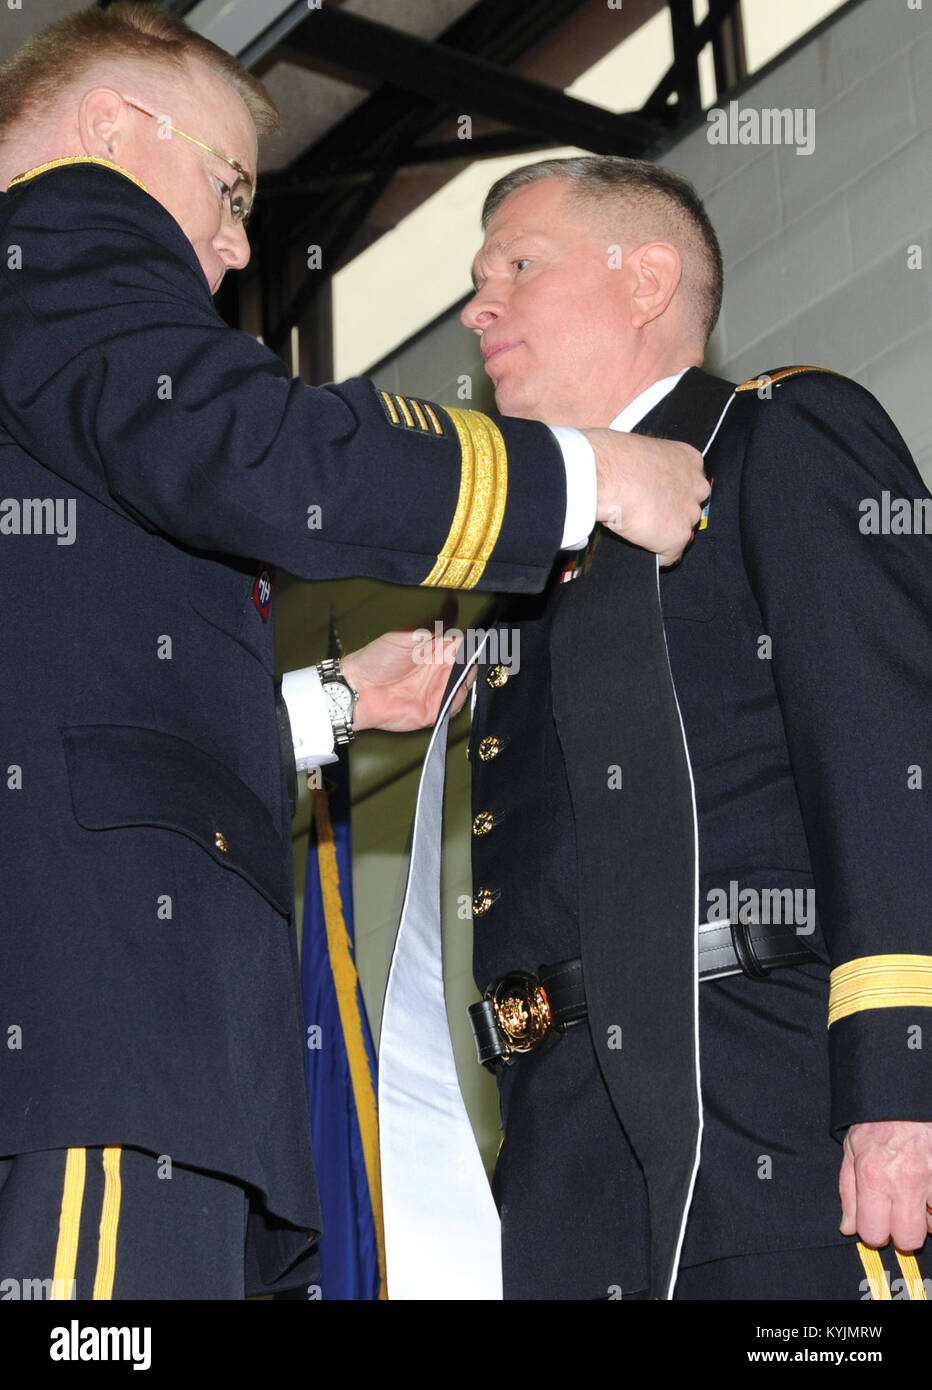 Army Chief of Chaplains Maj. Gen. Donald L. Rutherford, presents Army Brig. Gen. David. E. Graetz, assistant to the Army chief of chaplains as the National Guard liaison, with a stole during his promotion ceremony at the Maj. Gen. Billy G.  Wellman Armory at Boone National Guard Center in Frankfort, Ky., Jan. 11, 2015.The stole formally symbolizes the responsibilities assumed with Graetz’s promotion. Stock Photo